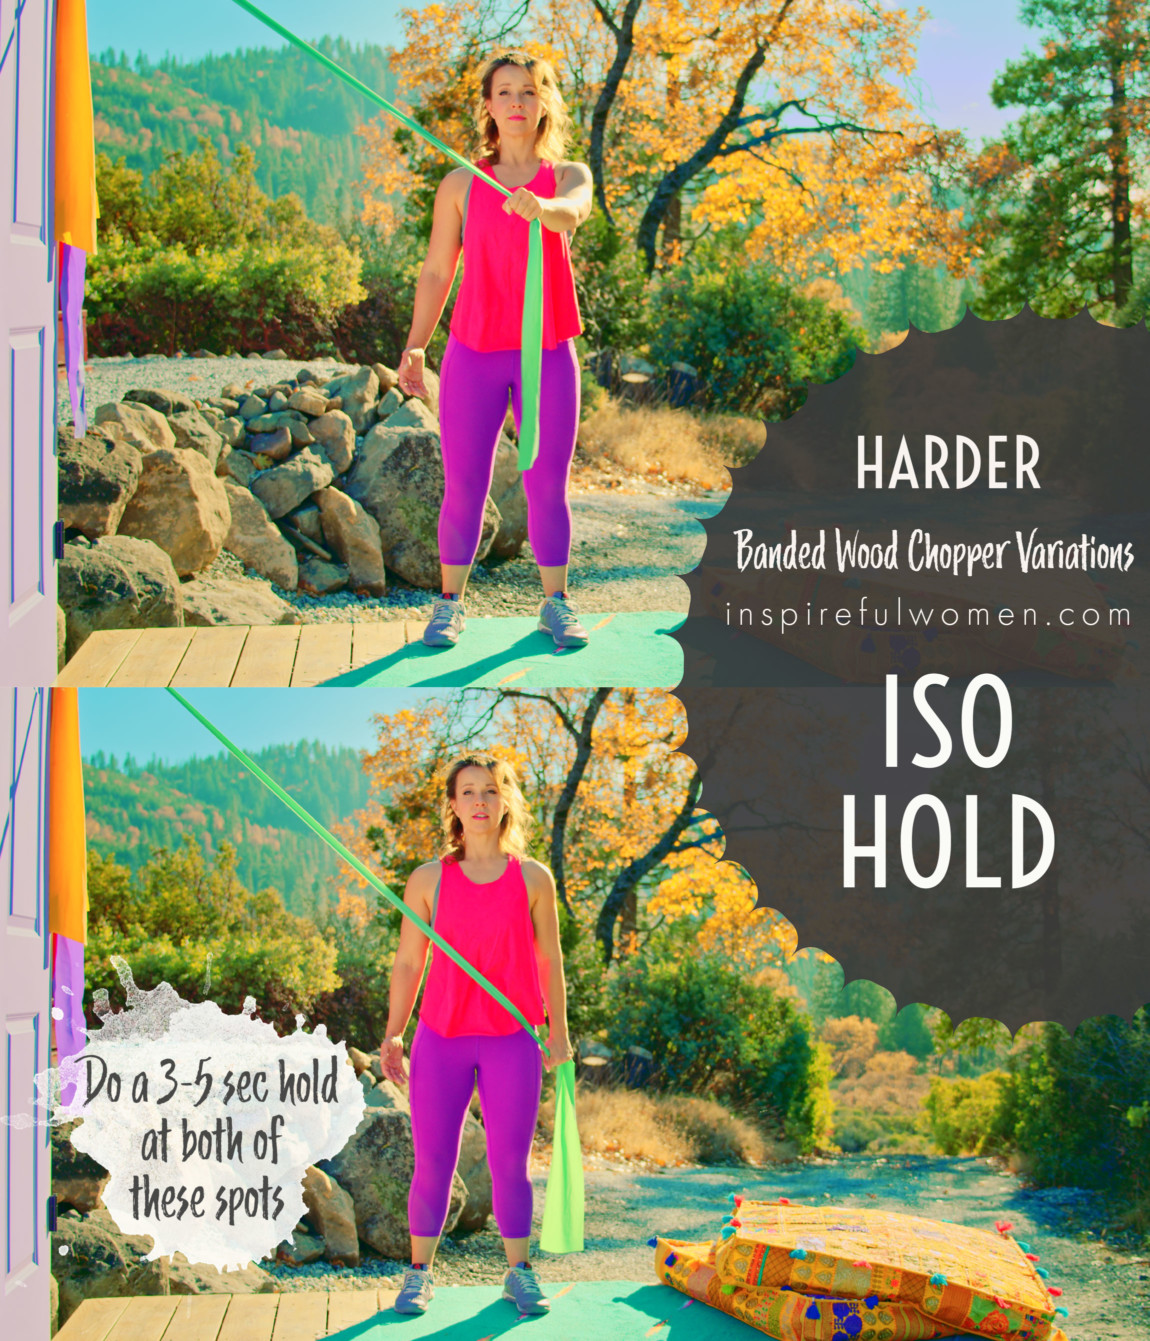 ISO-hold-resistance-band-wood-chop-core-exercise-harder